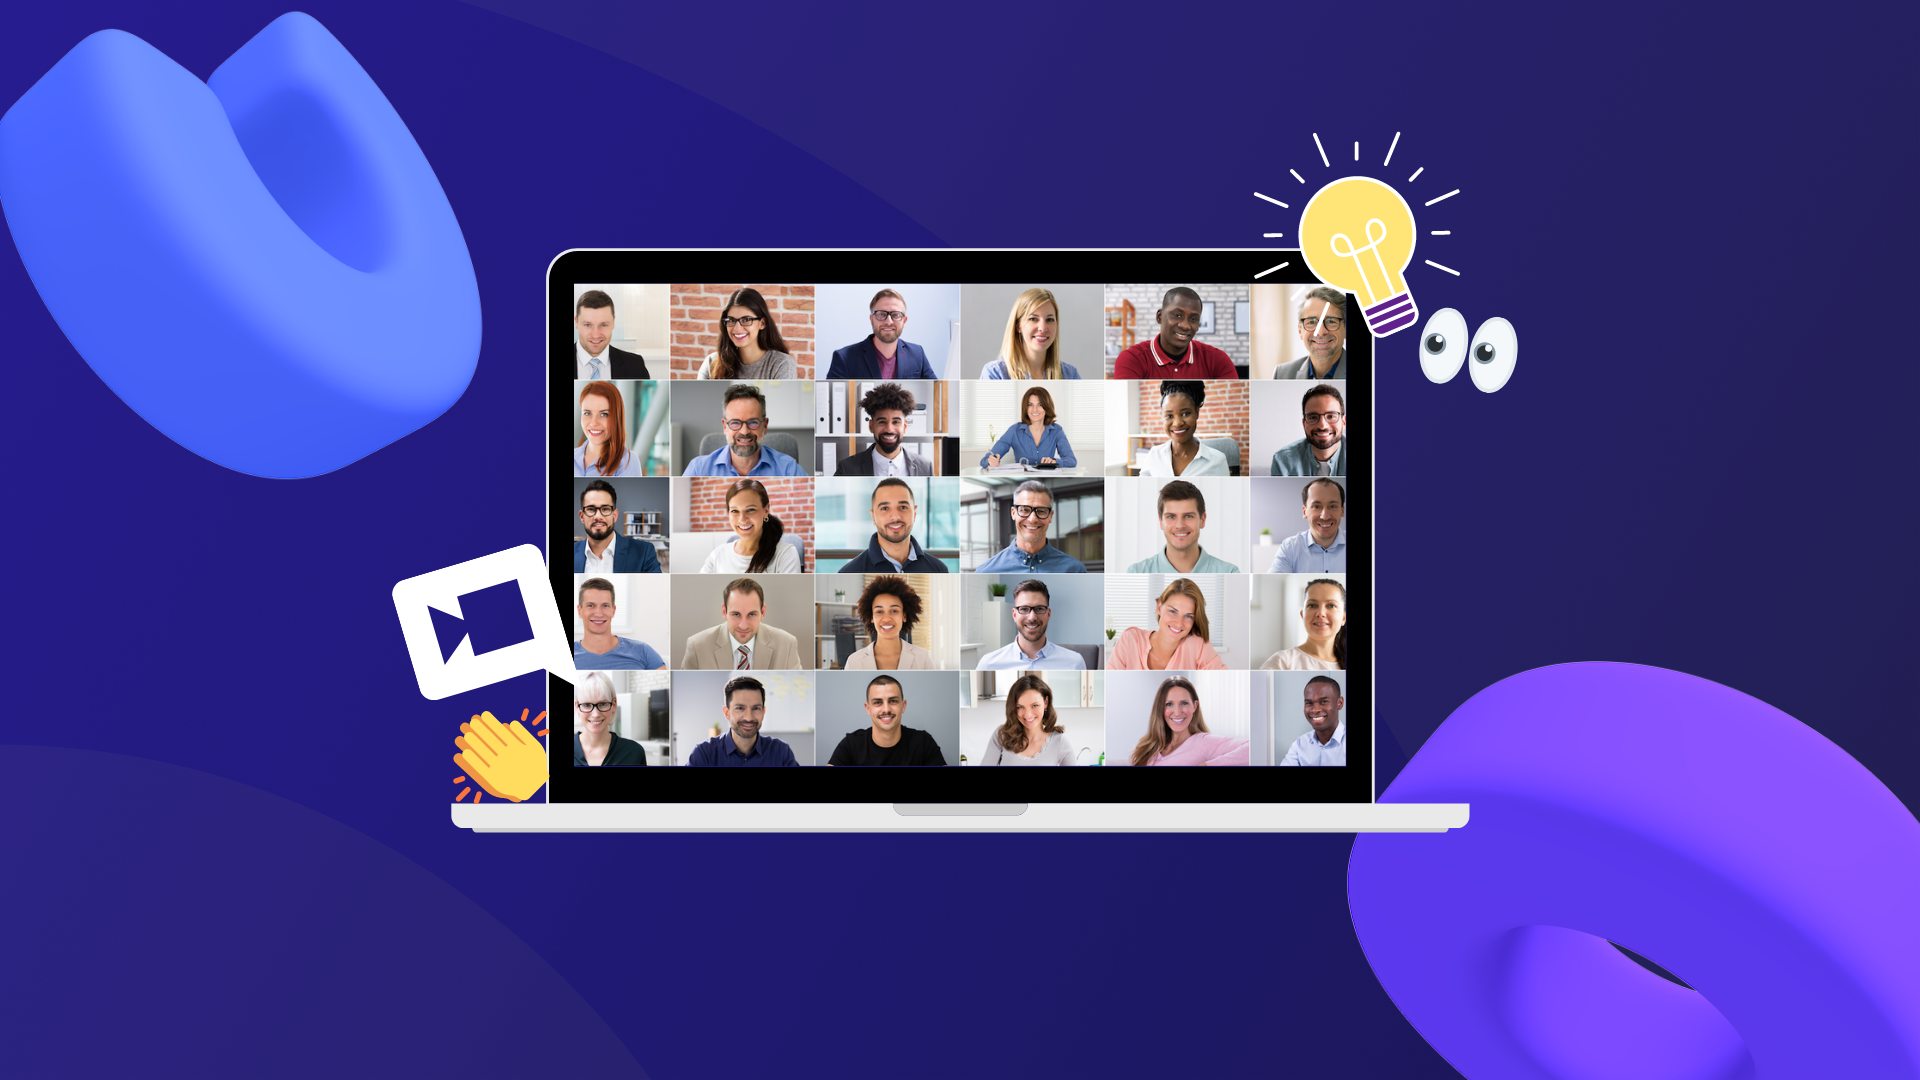 Video-Based Knowledge For Your Remote Teams conceptual image of virtual meeting